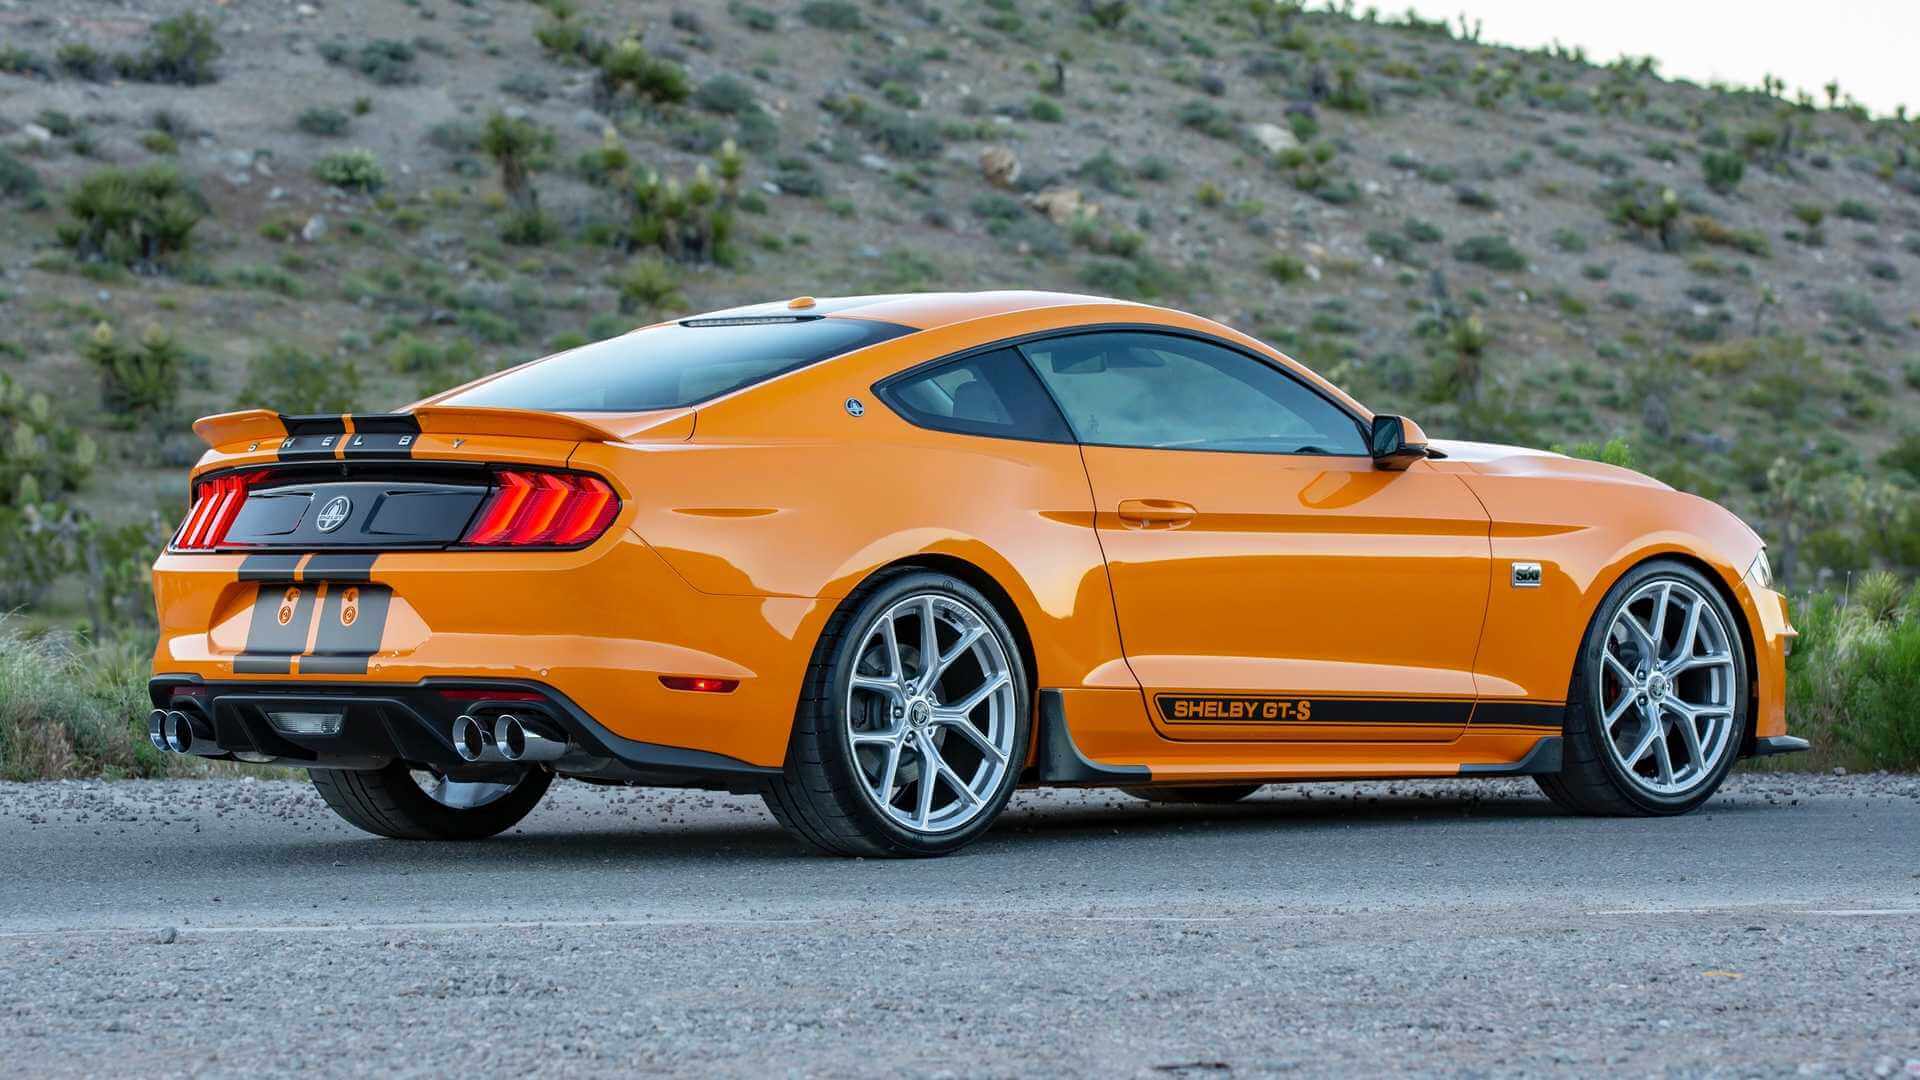 MUSTANG SHELBY GT-S